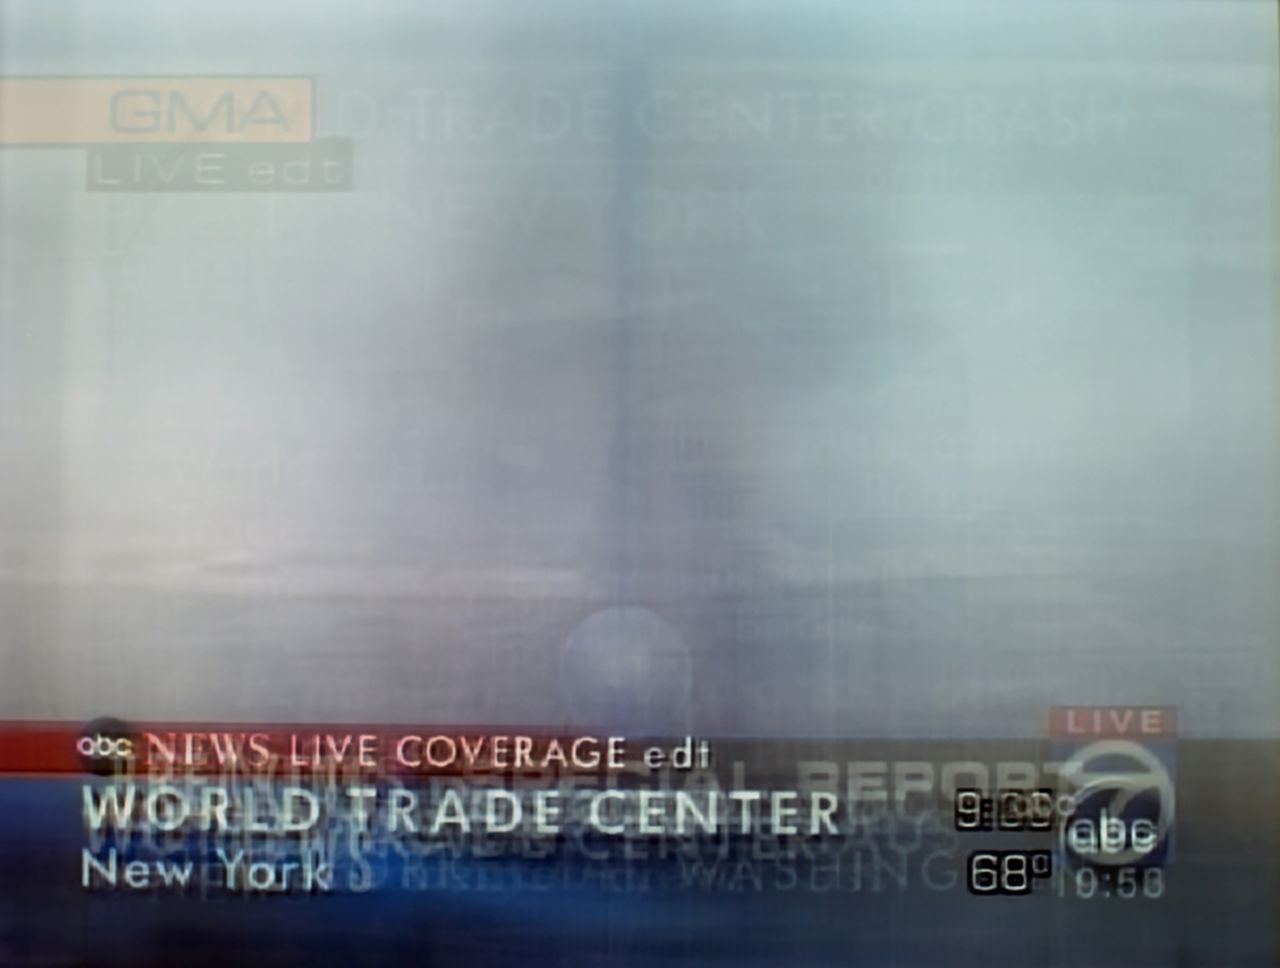 A photograph of coverage of 9/11 on ABC News